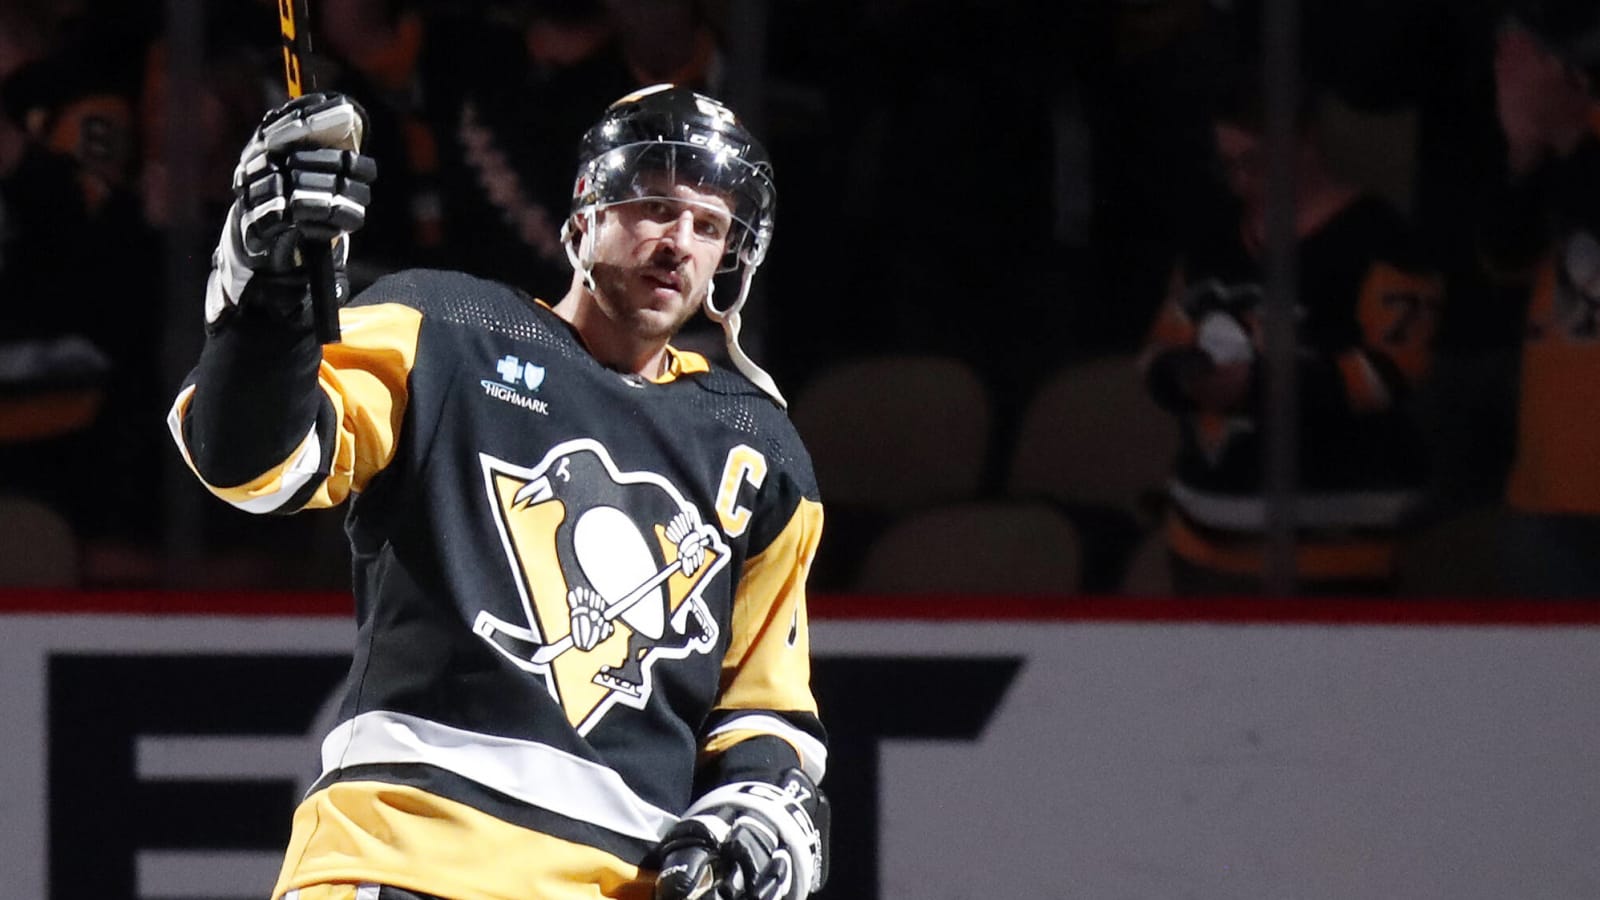 Crosby’s Numbers Add Up to Great Season